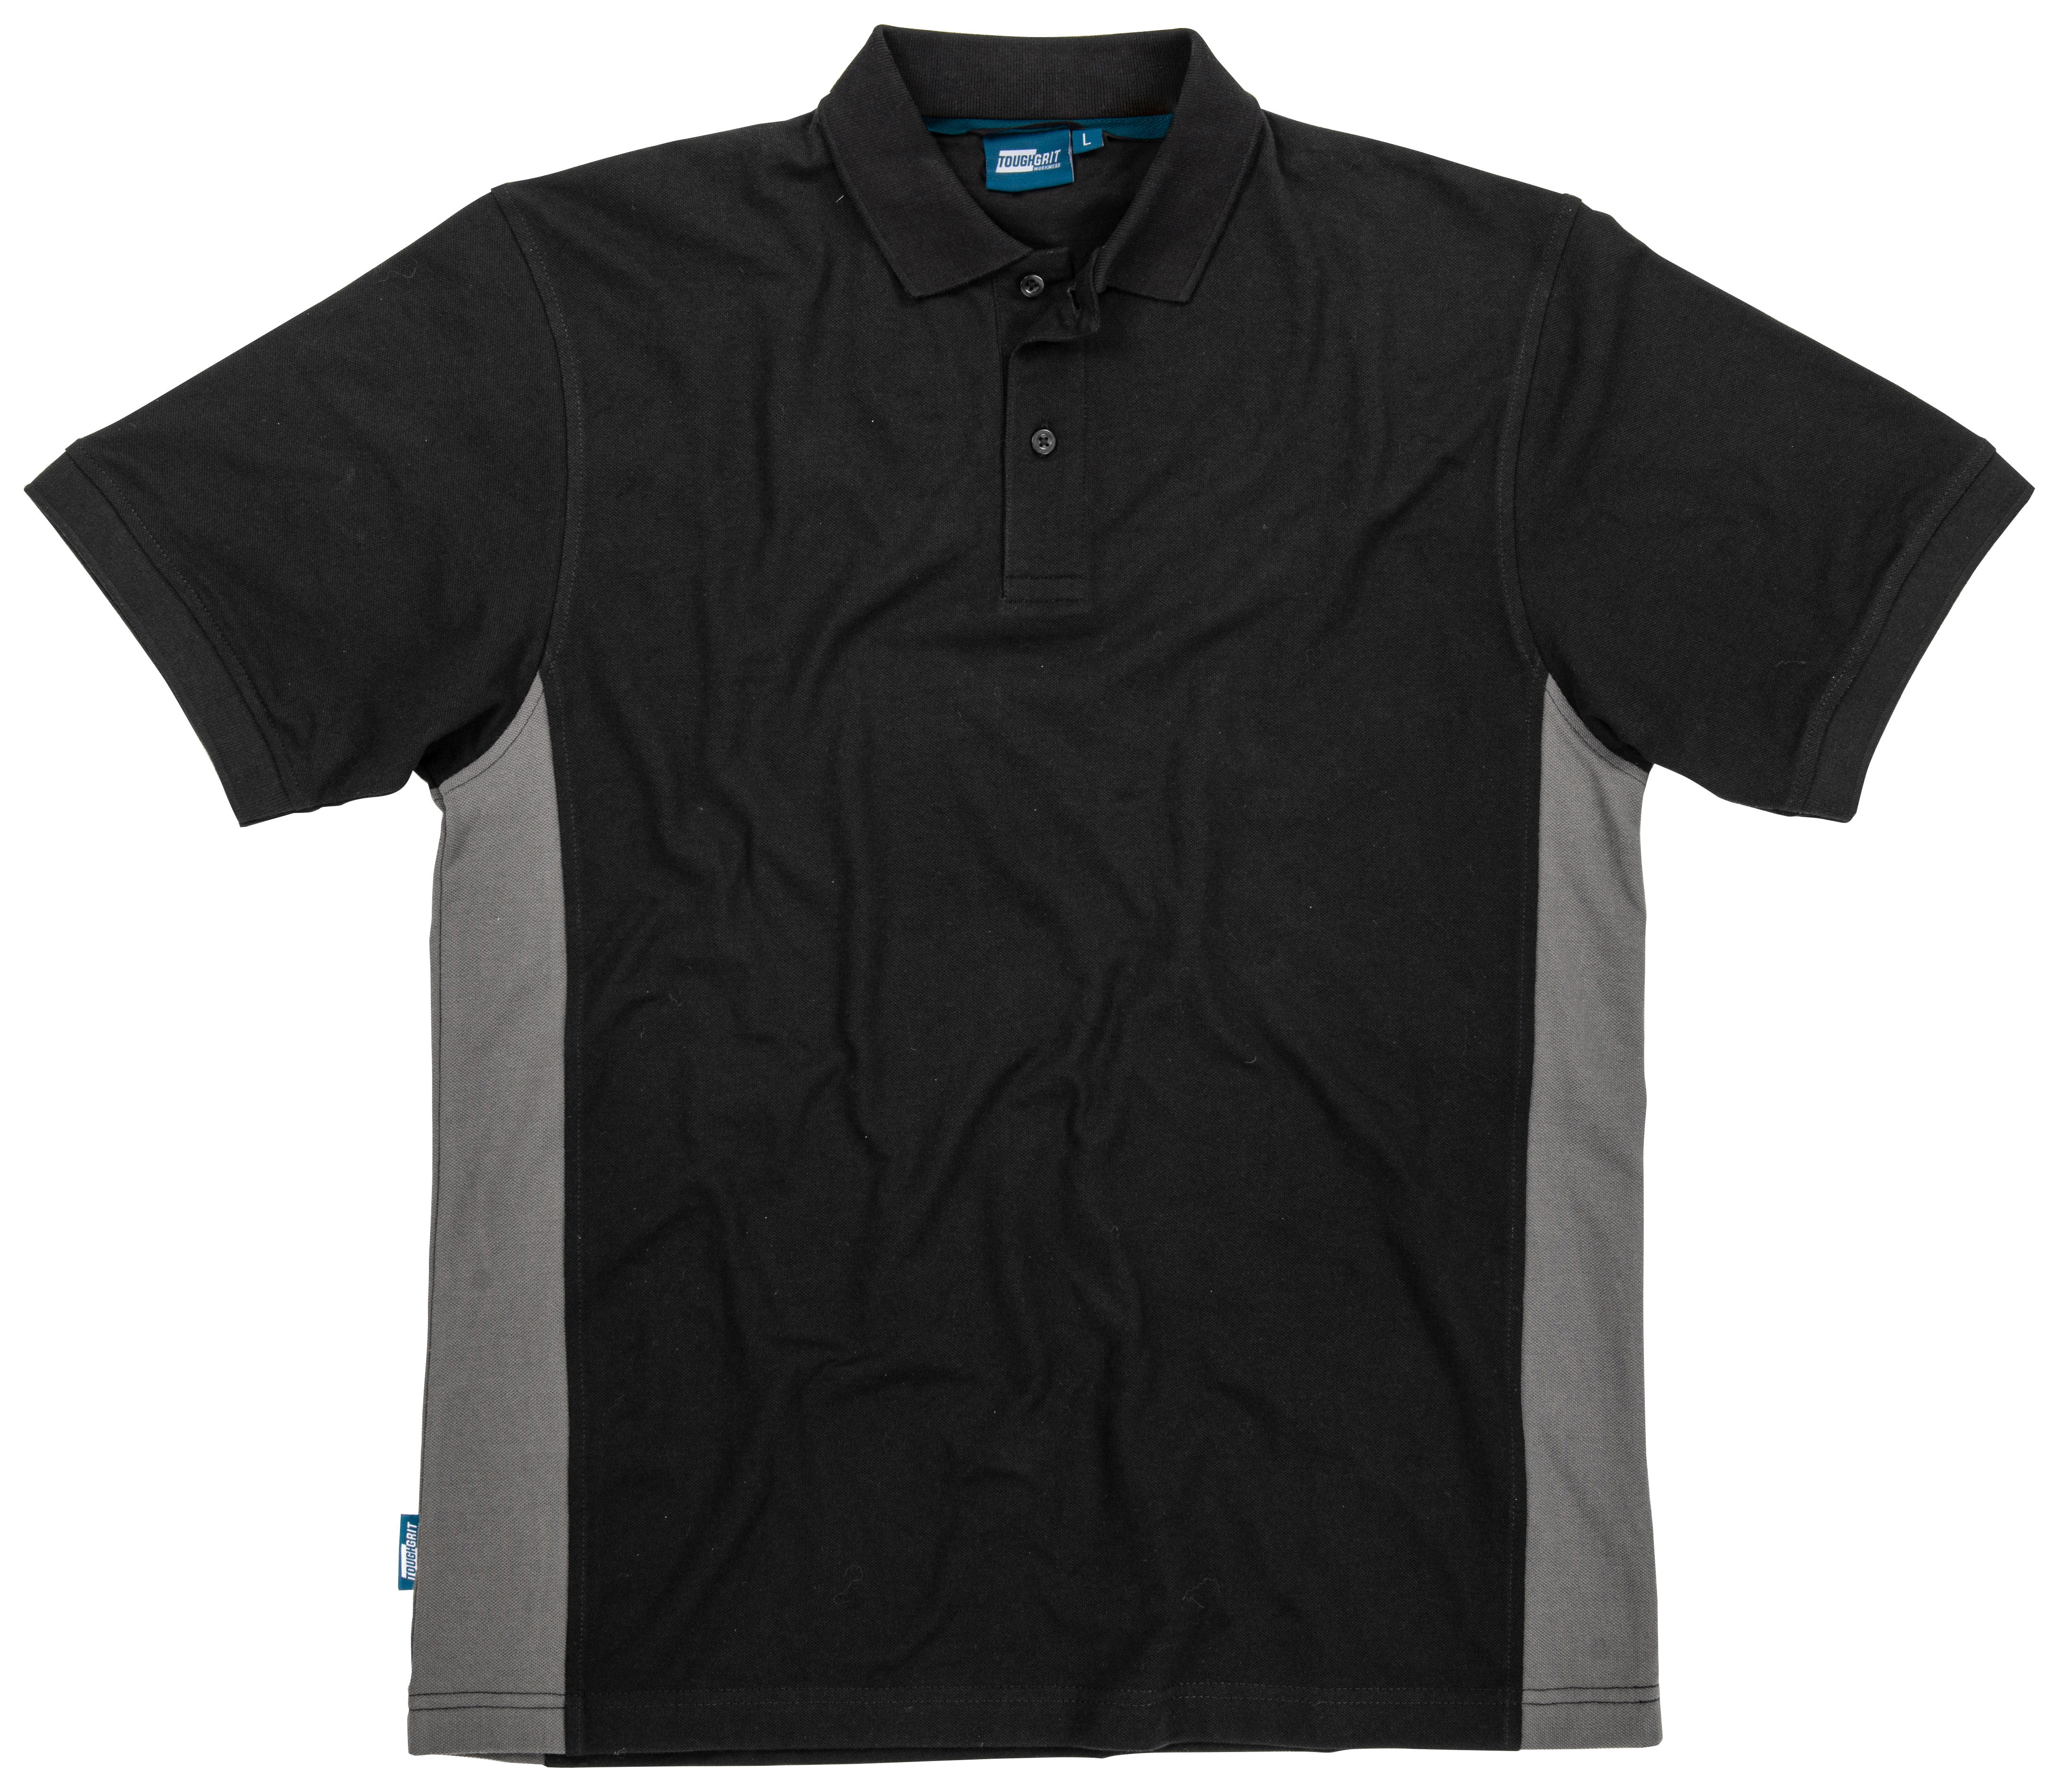 Image of Tough Grit Polo Shirt, in Black and Grey Breathable, Cotton, Size: M